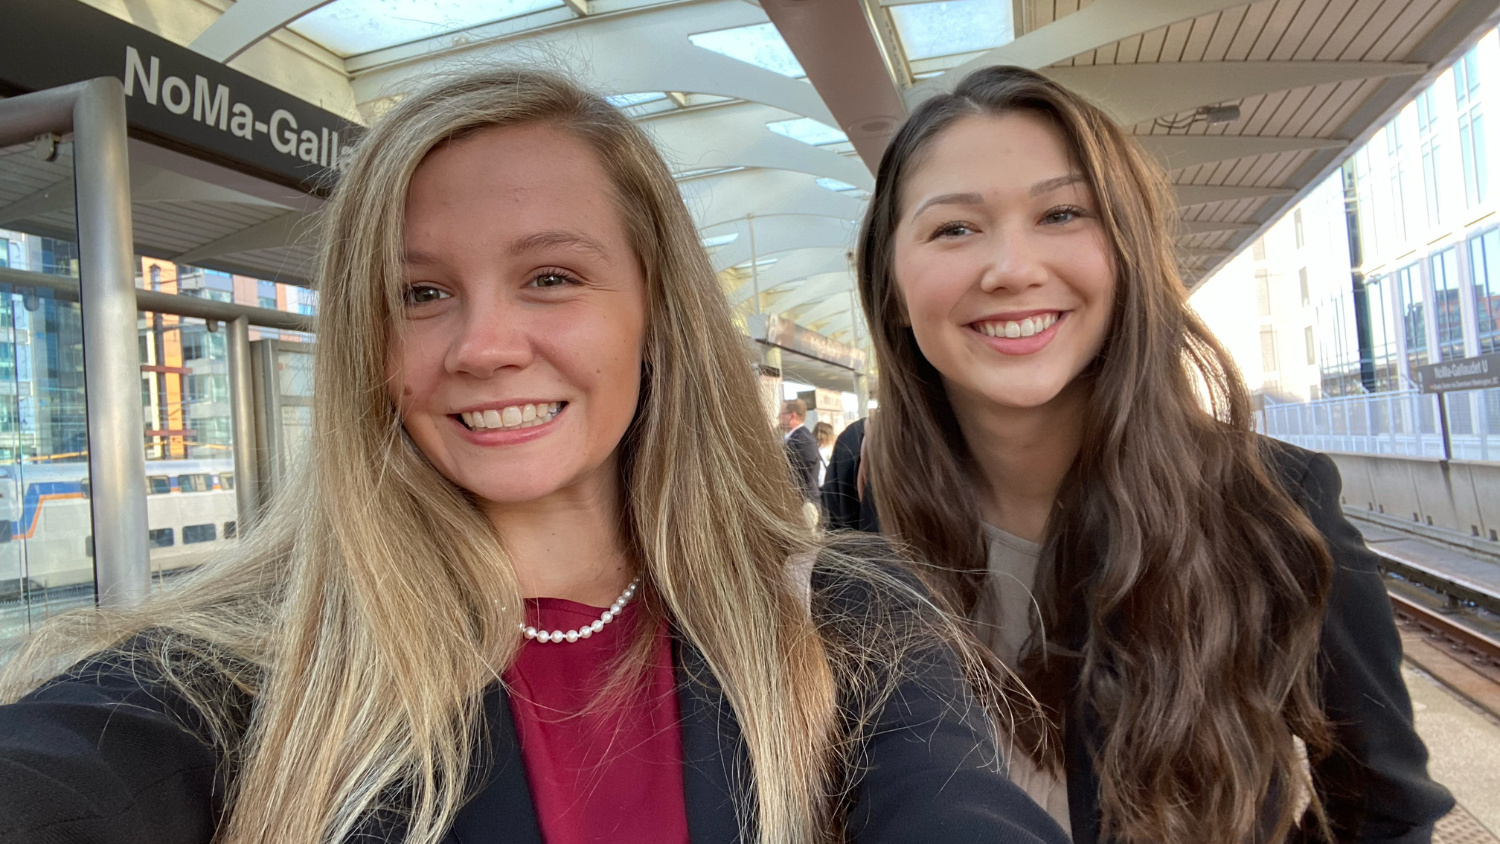 two female CALS students taking a selfie in Washington, D.C.